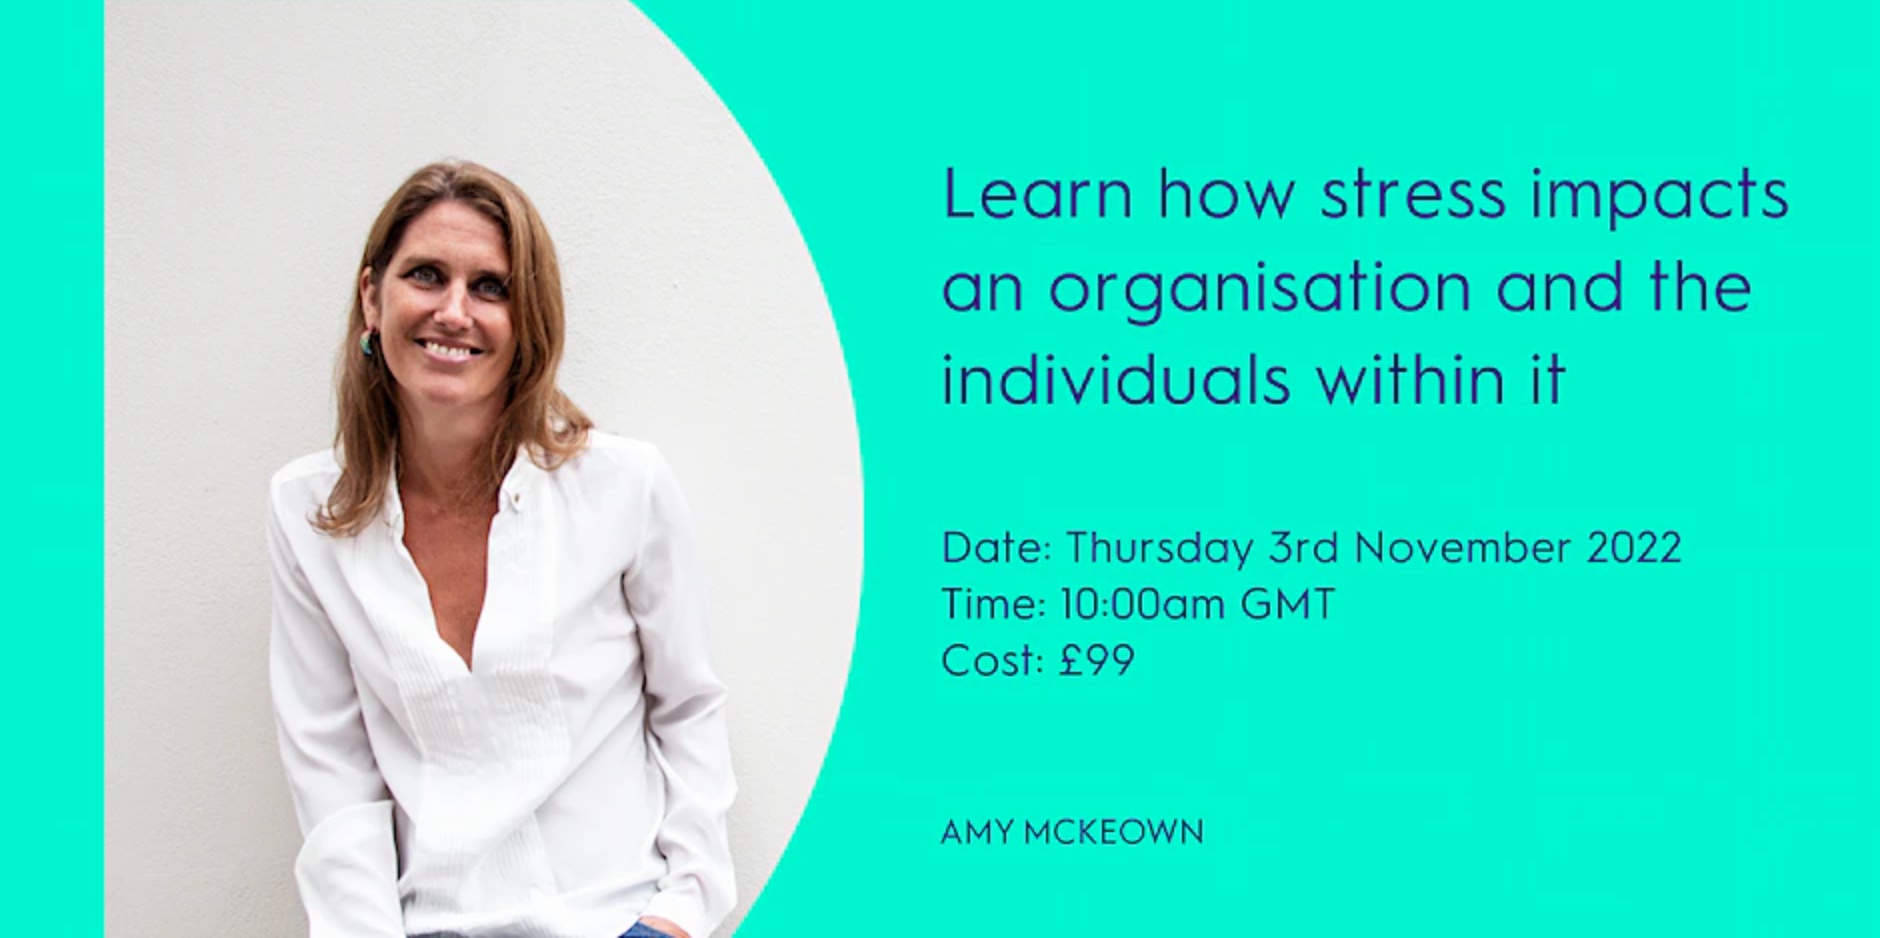 Learn how stress impacts an organisation and the individuals within it